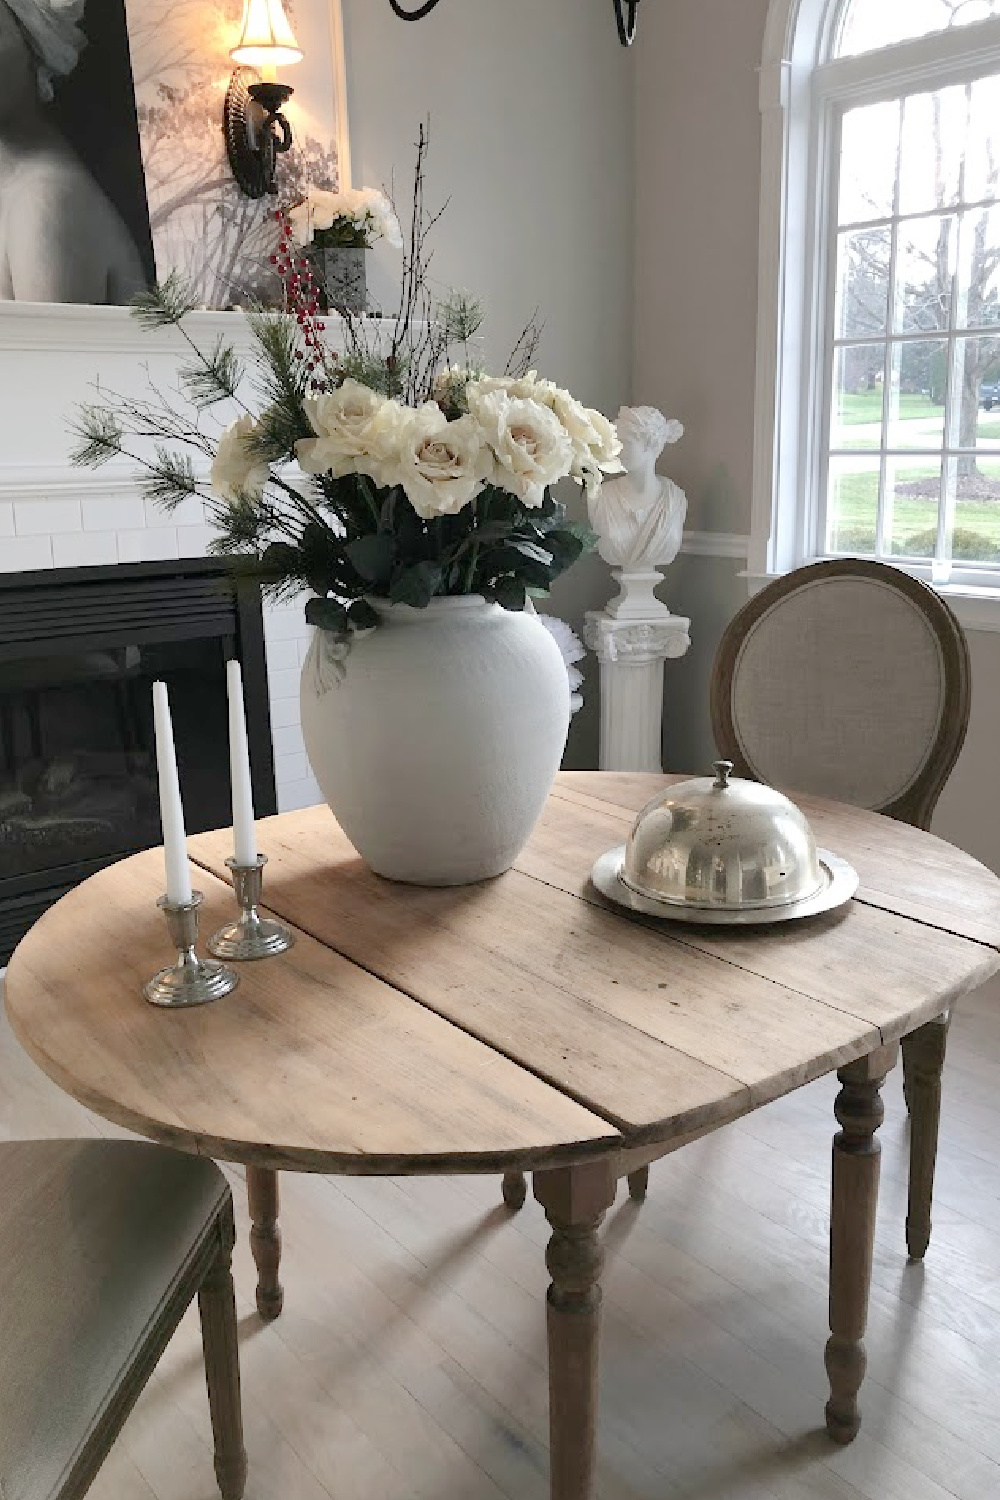 Antique srubbed wood oval dining table with large French urn and white roses - Hello Lovely Studio. #modernfrench #diningroom